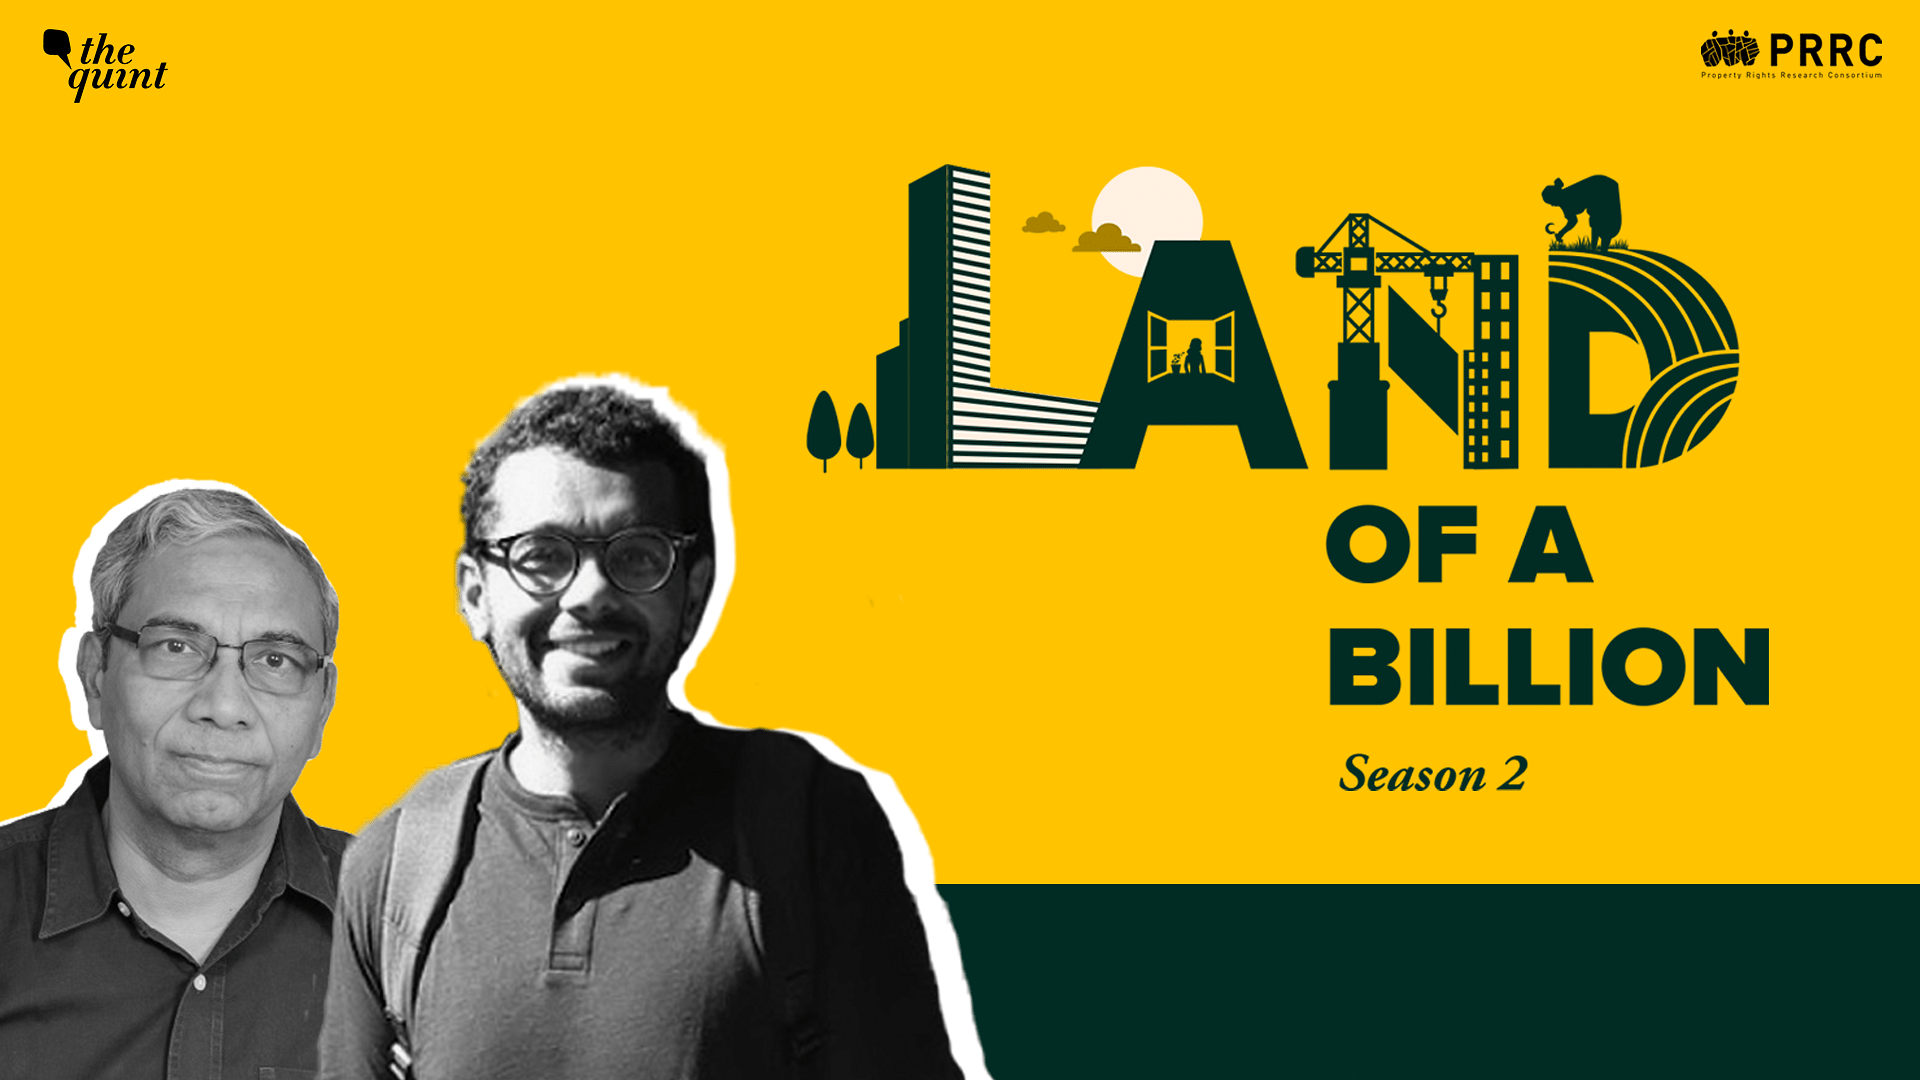 <div class="paragraphs"><p>In episode 3 of 'Land of a Billion' Season 2, we speak to (left) Gautam Chatterjee, former Chairperson of MahaRERA, the Real Estate Regulatory Authority of Maharashtra, and (right) Sahil Gandhi, an urban and real estate economist.</p></div>